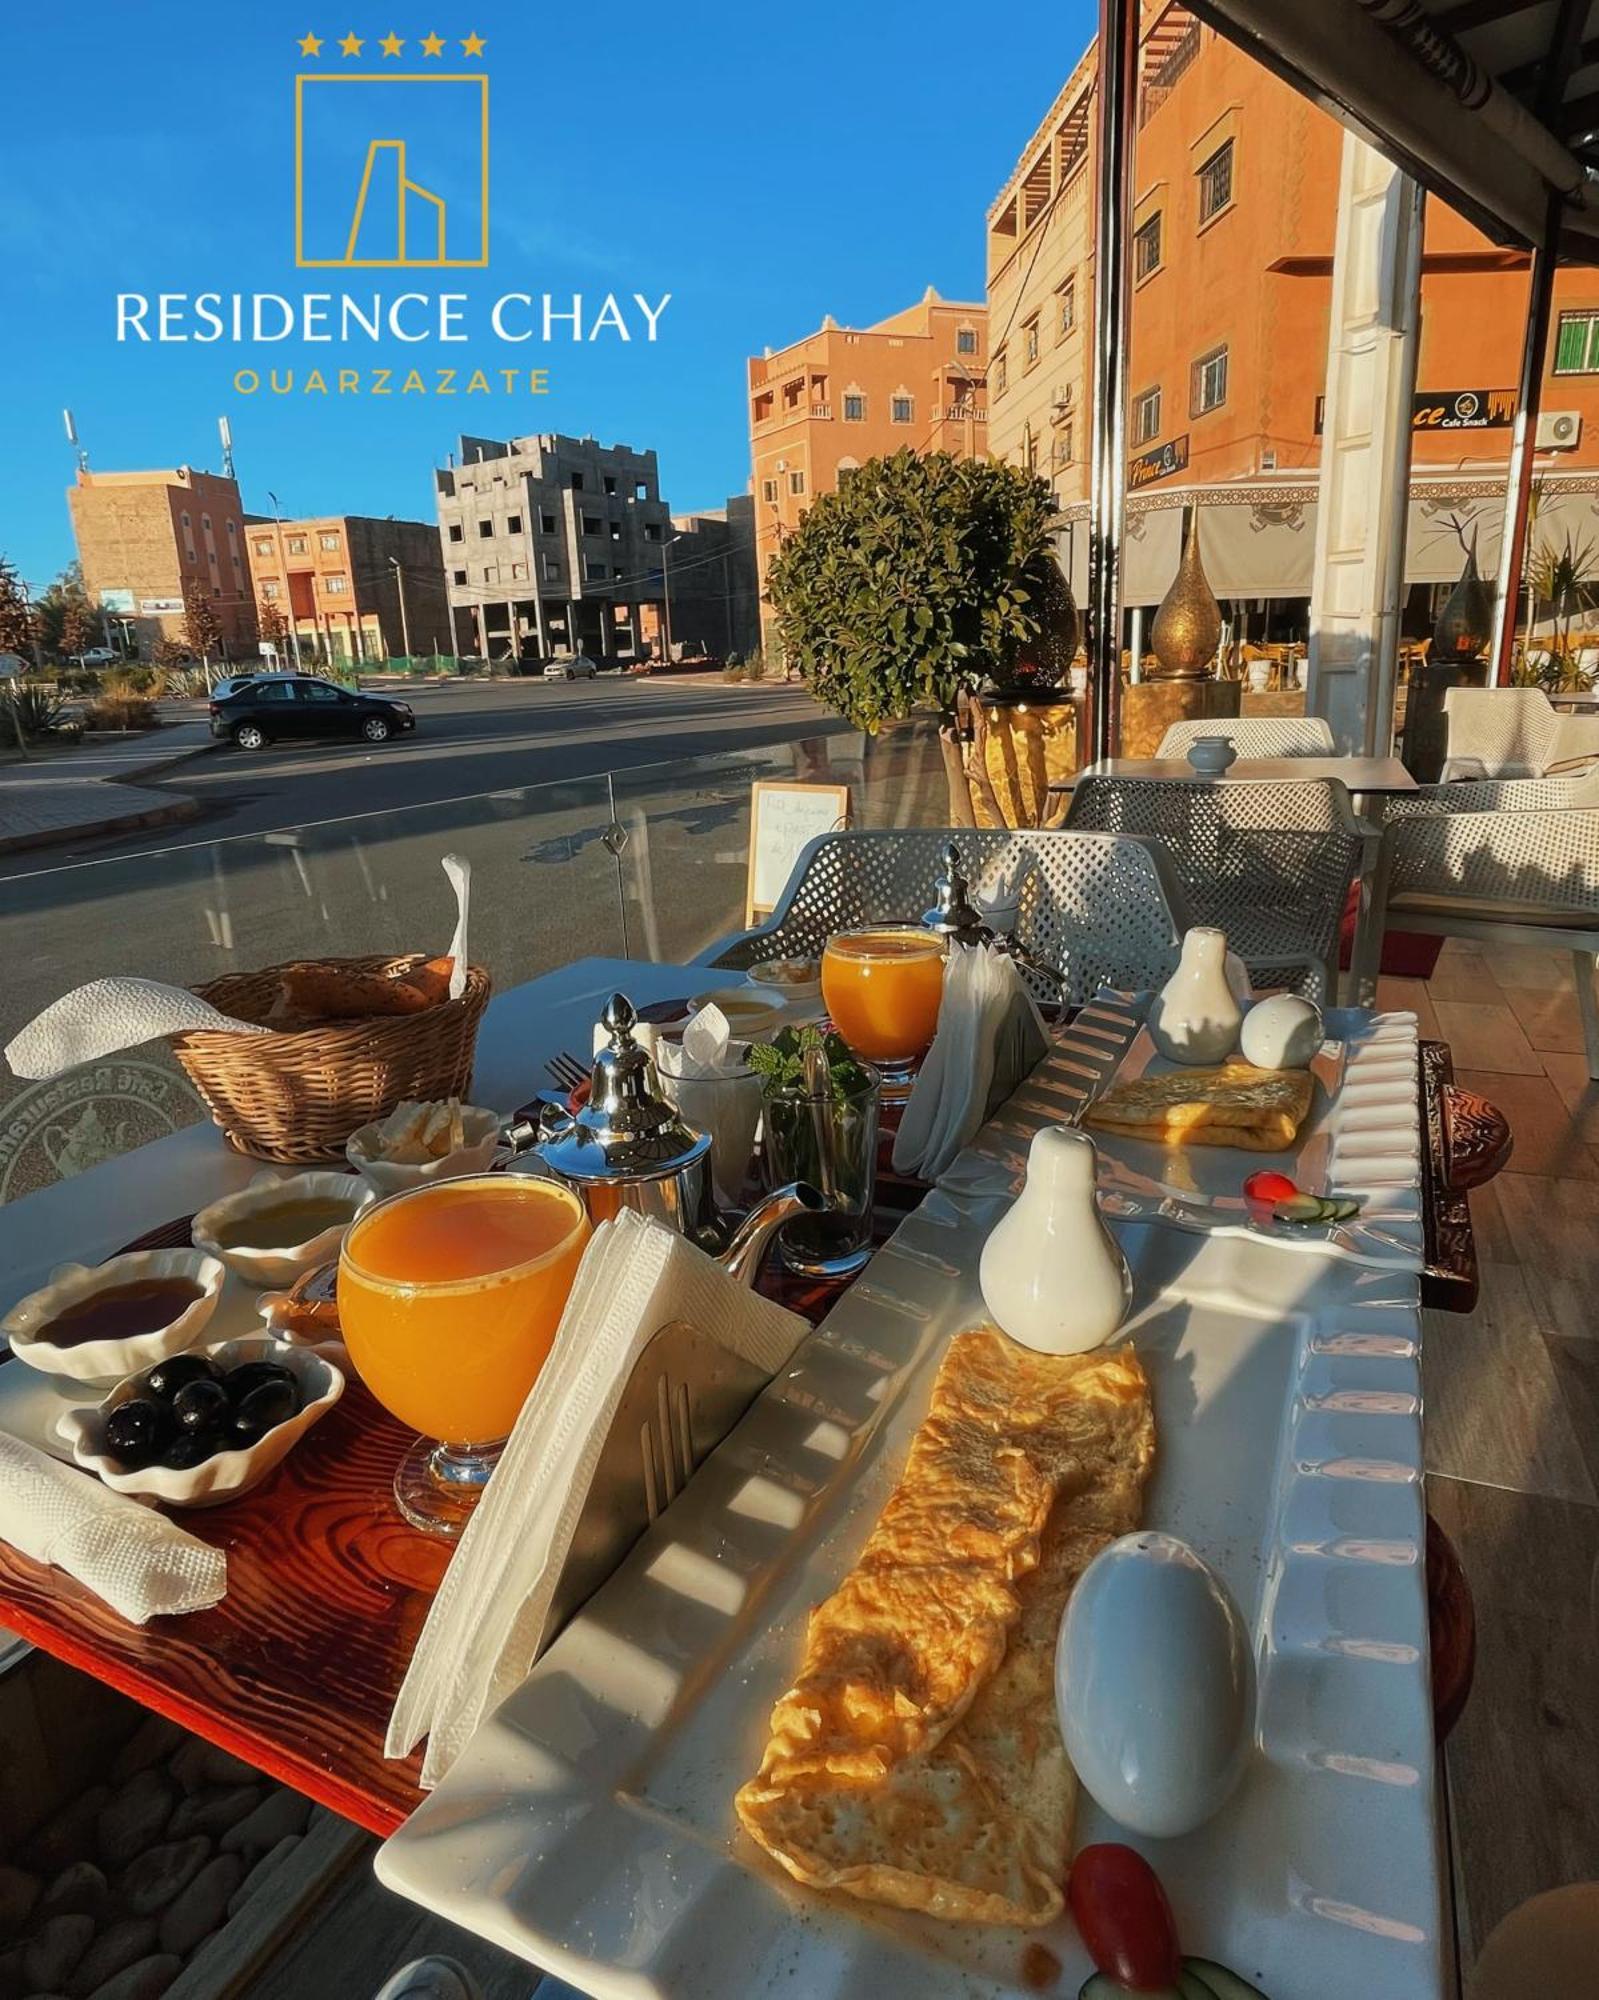 Residence Chay - Appartement De Luxe 瓦尔扎扎特 外观 照片